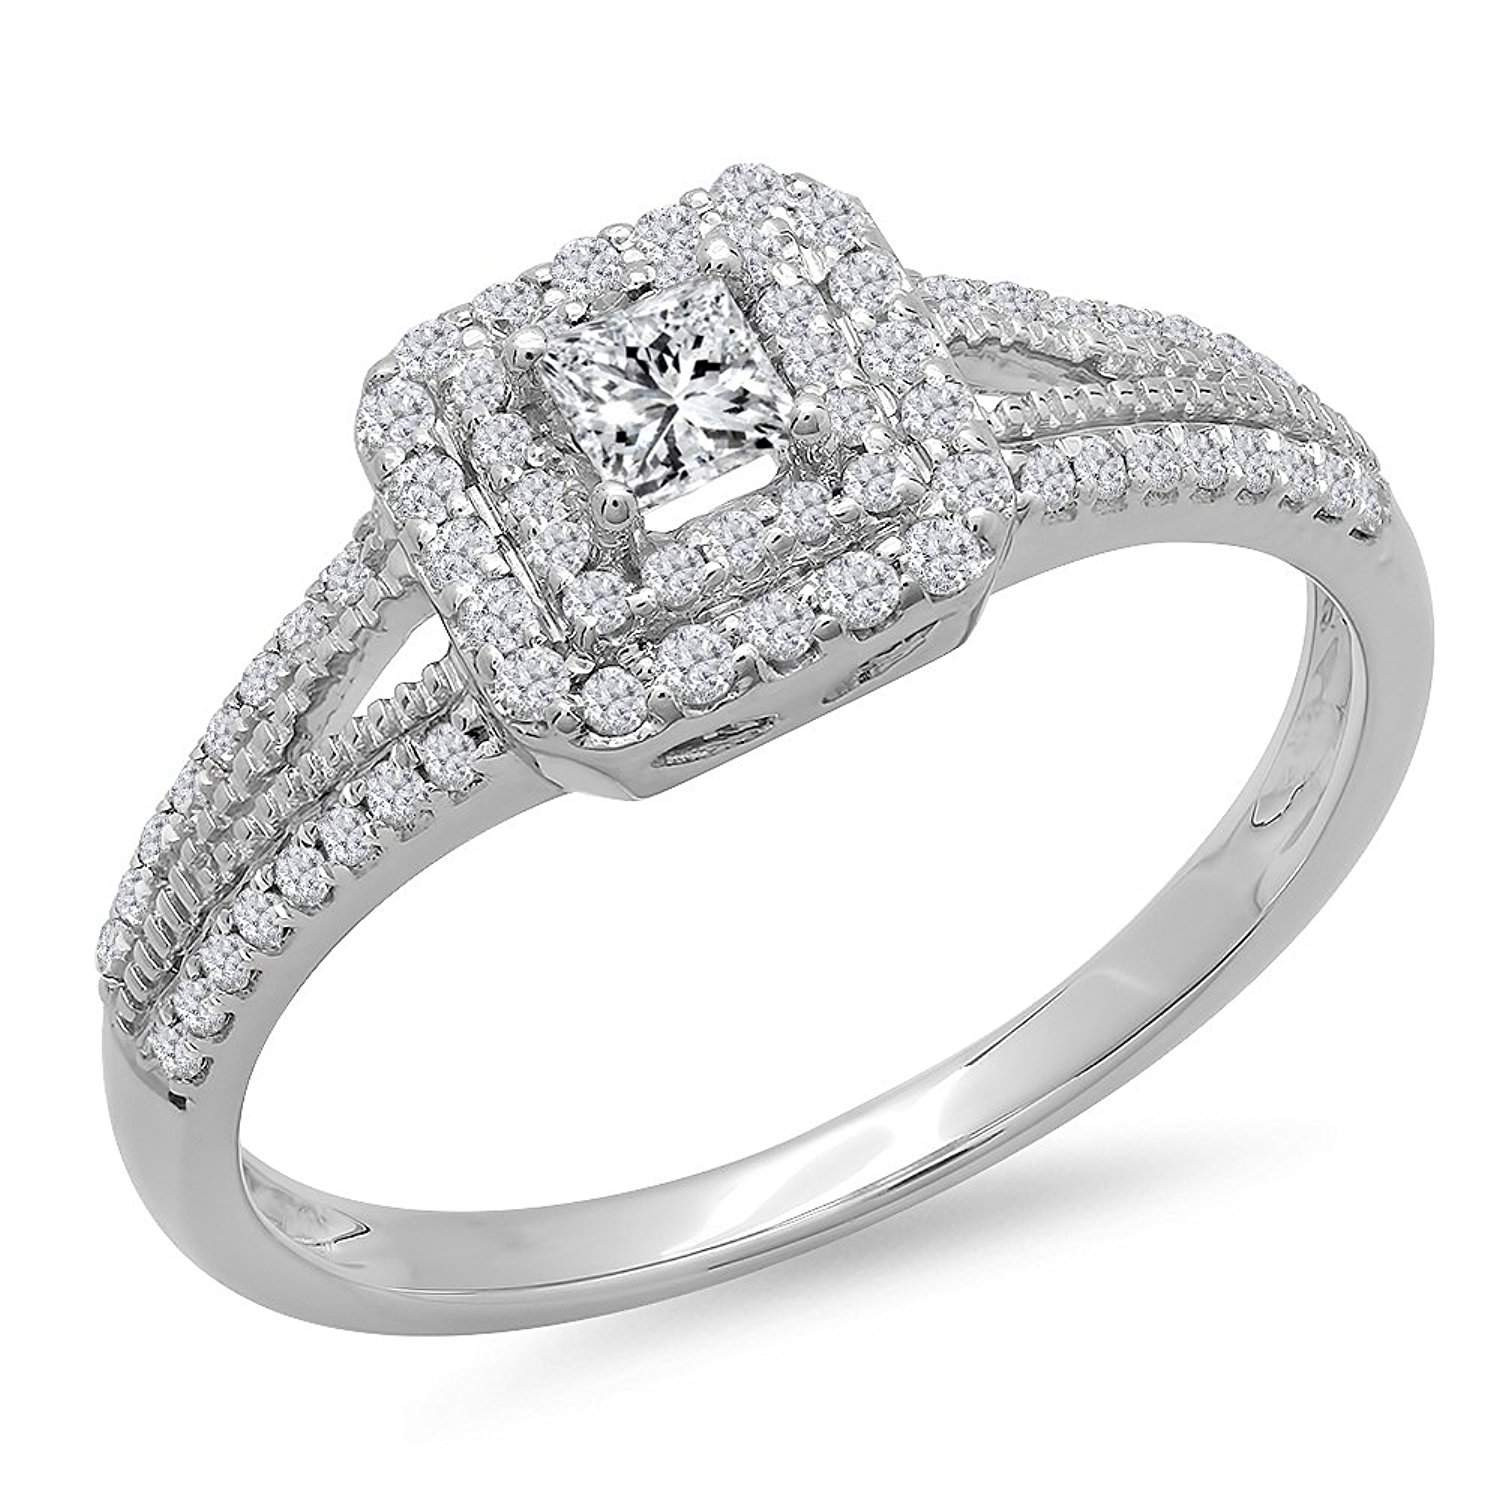 Best Wedding Rings For Women
 Top 10 Best Valentine’s Day Deals on Engagement Rings